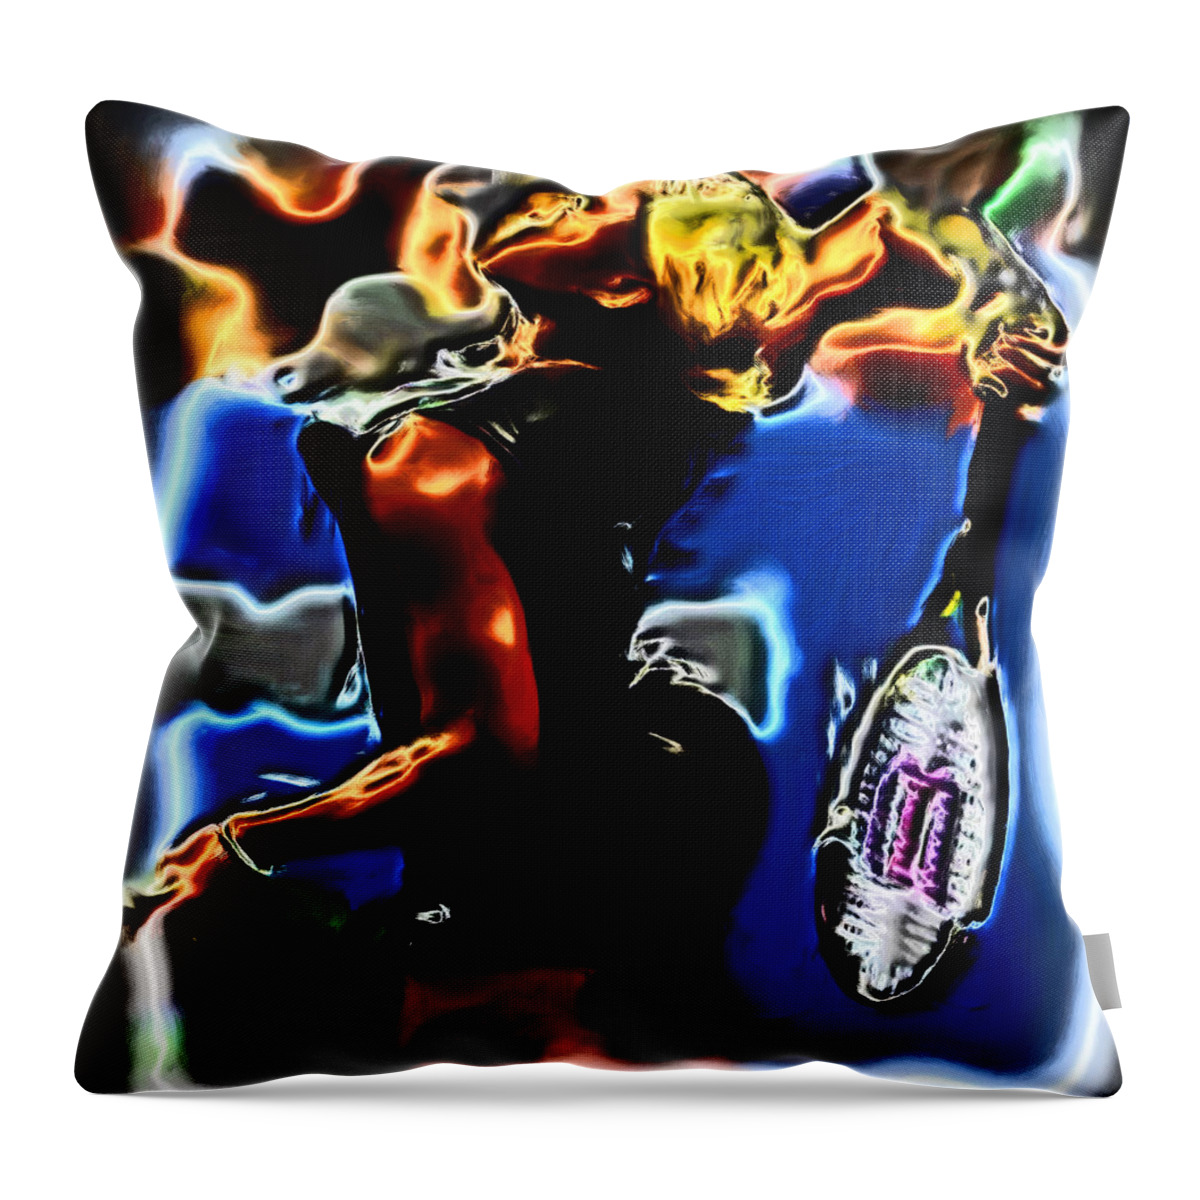 Serena Williams Throw Pillow featuring the painting Serena Williams Thermal Catsuit by Brian Reaves